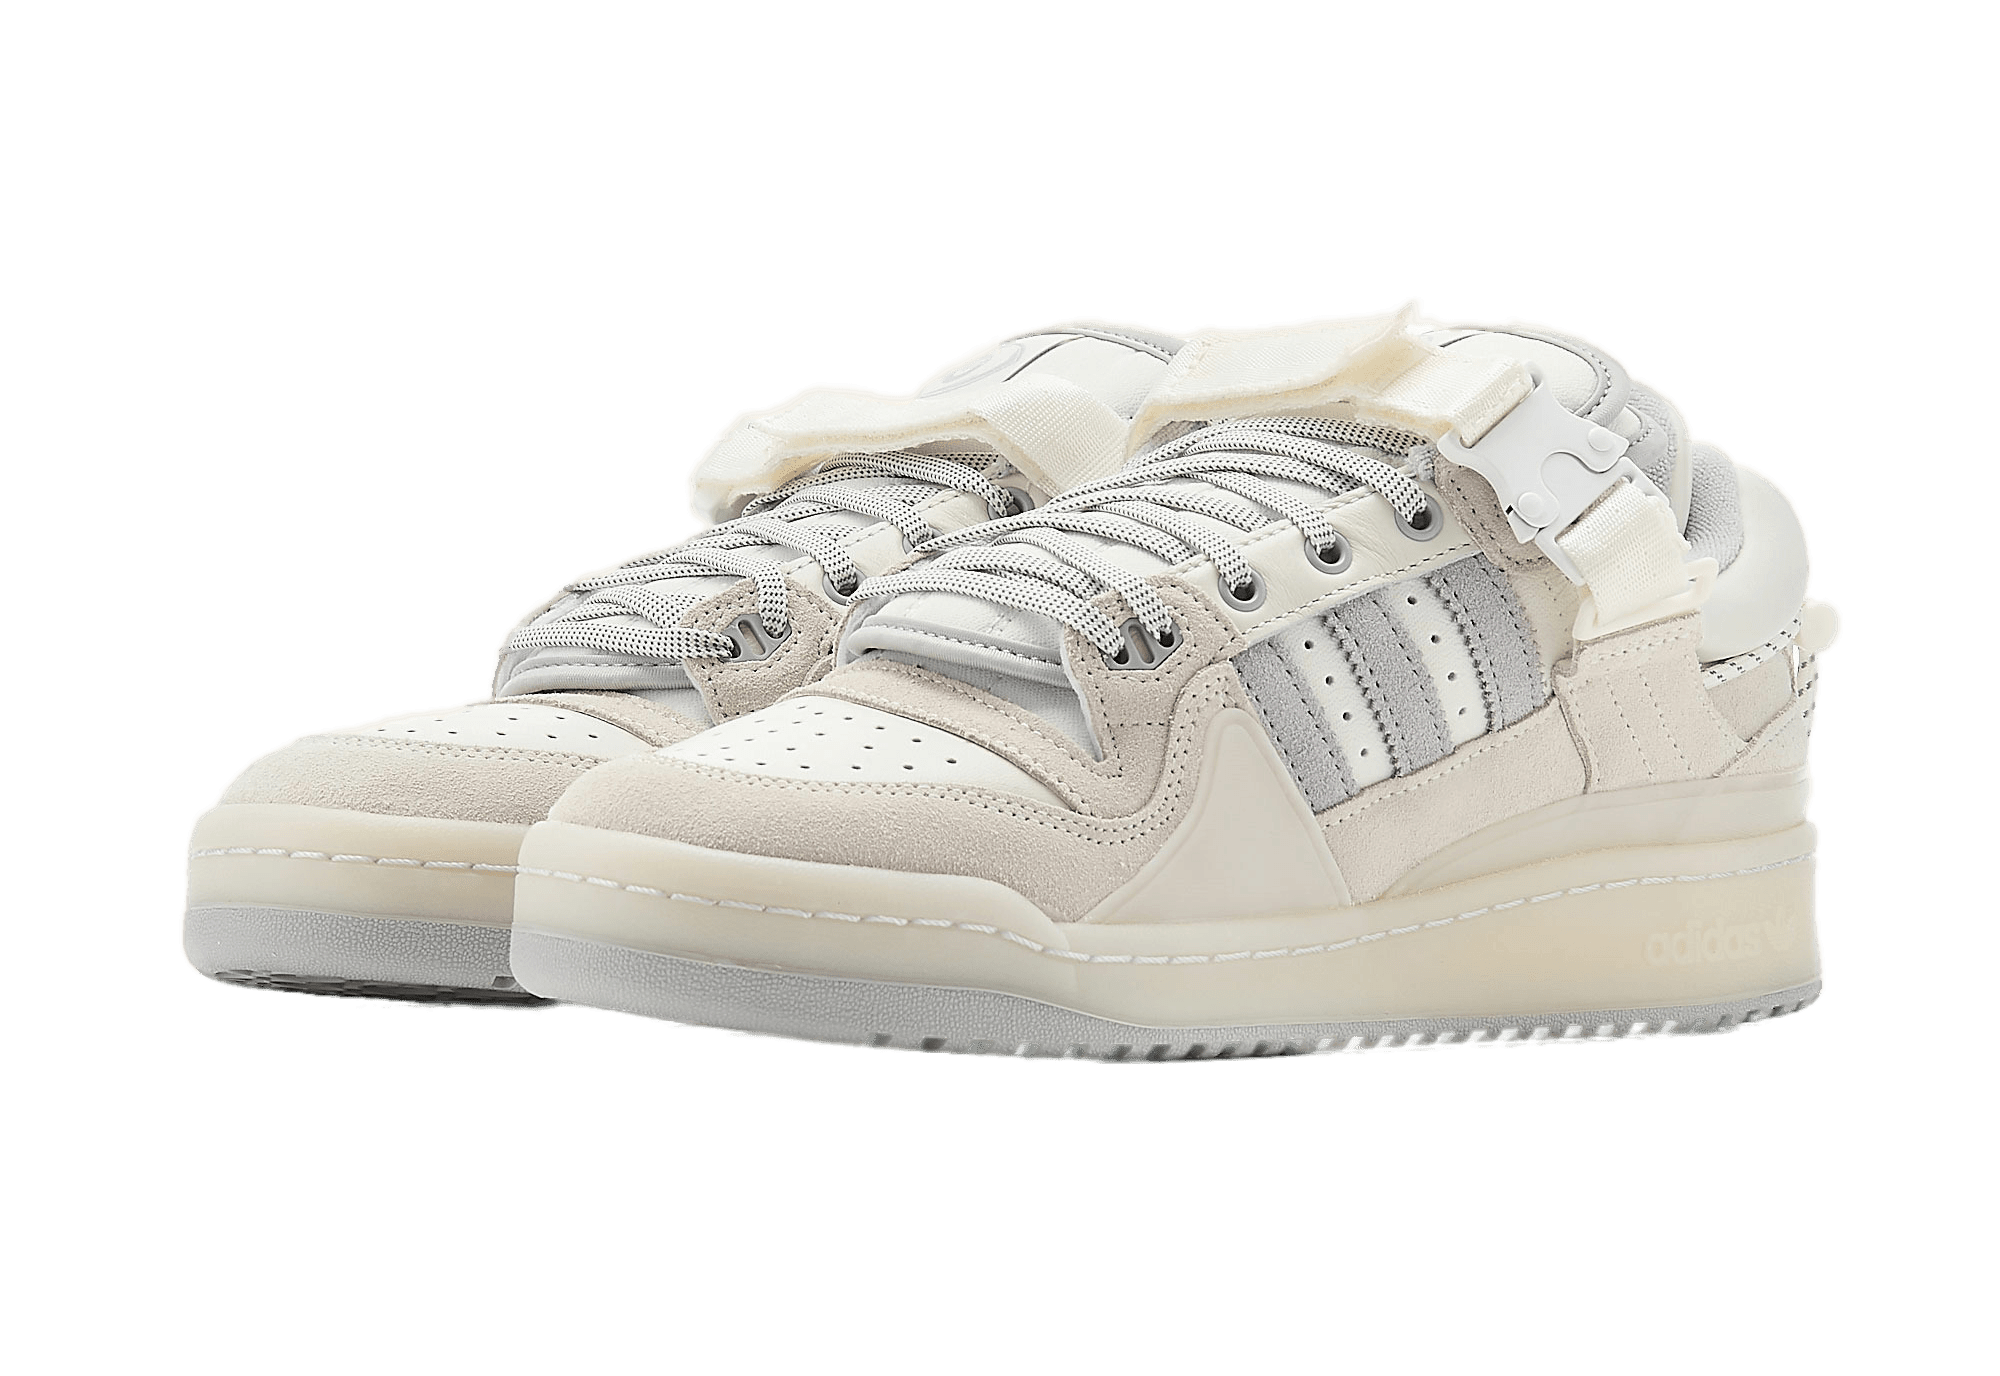 – Forum White Bad Bunny Cloud SneakCenter Low x Adidas